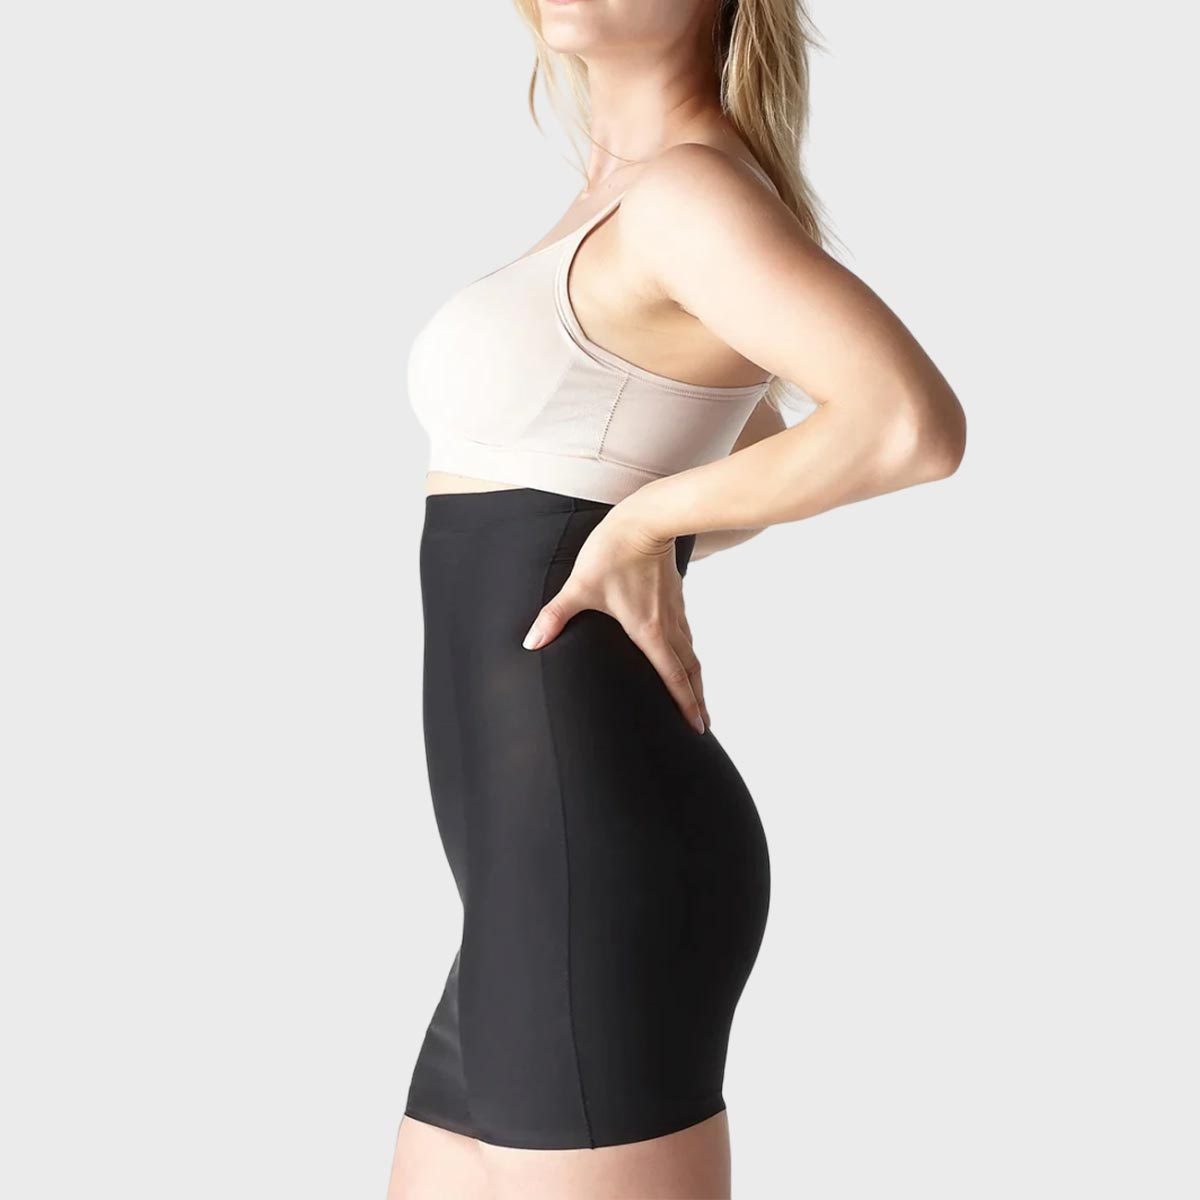 Find Cheap, Fashionable and Slimming best selling shapewear 